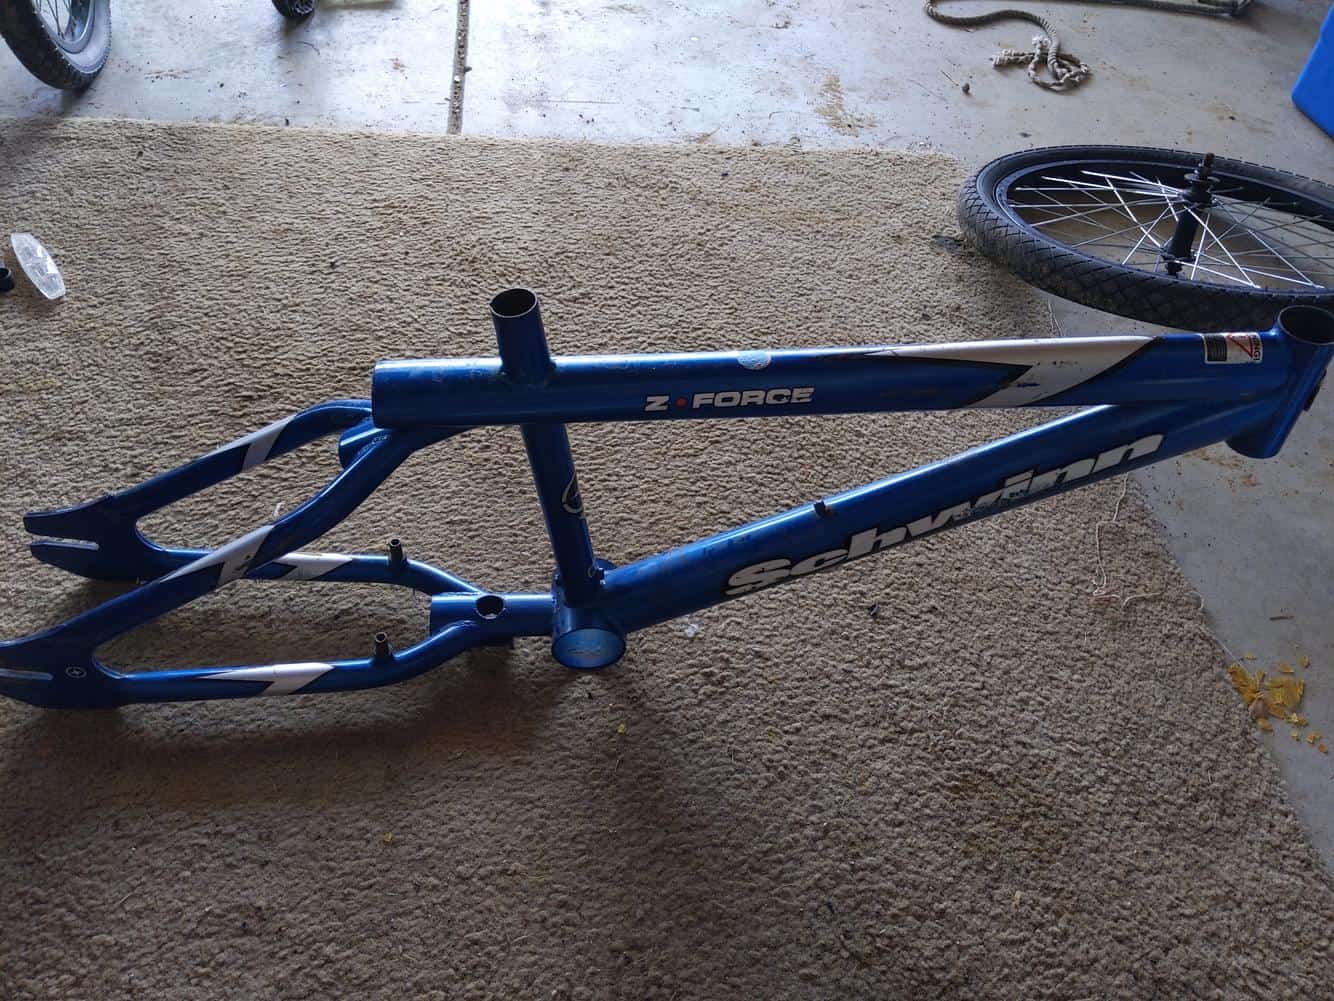 bmx bike frame in old condition